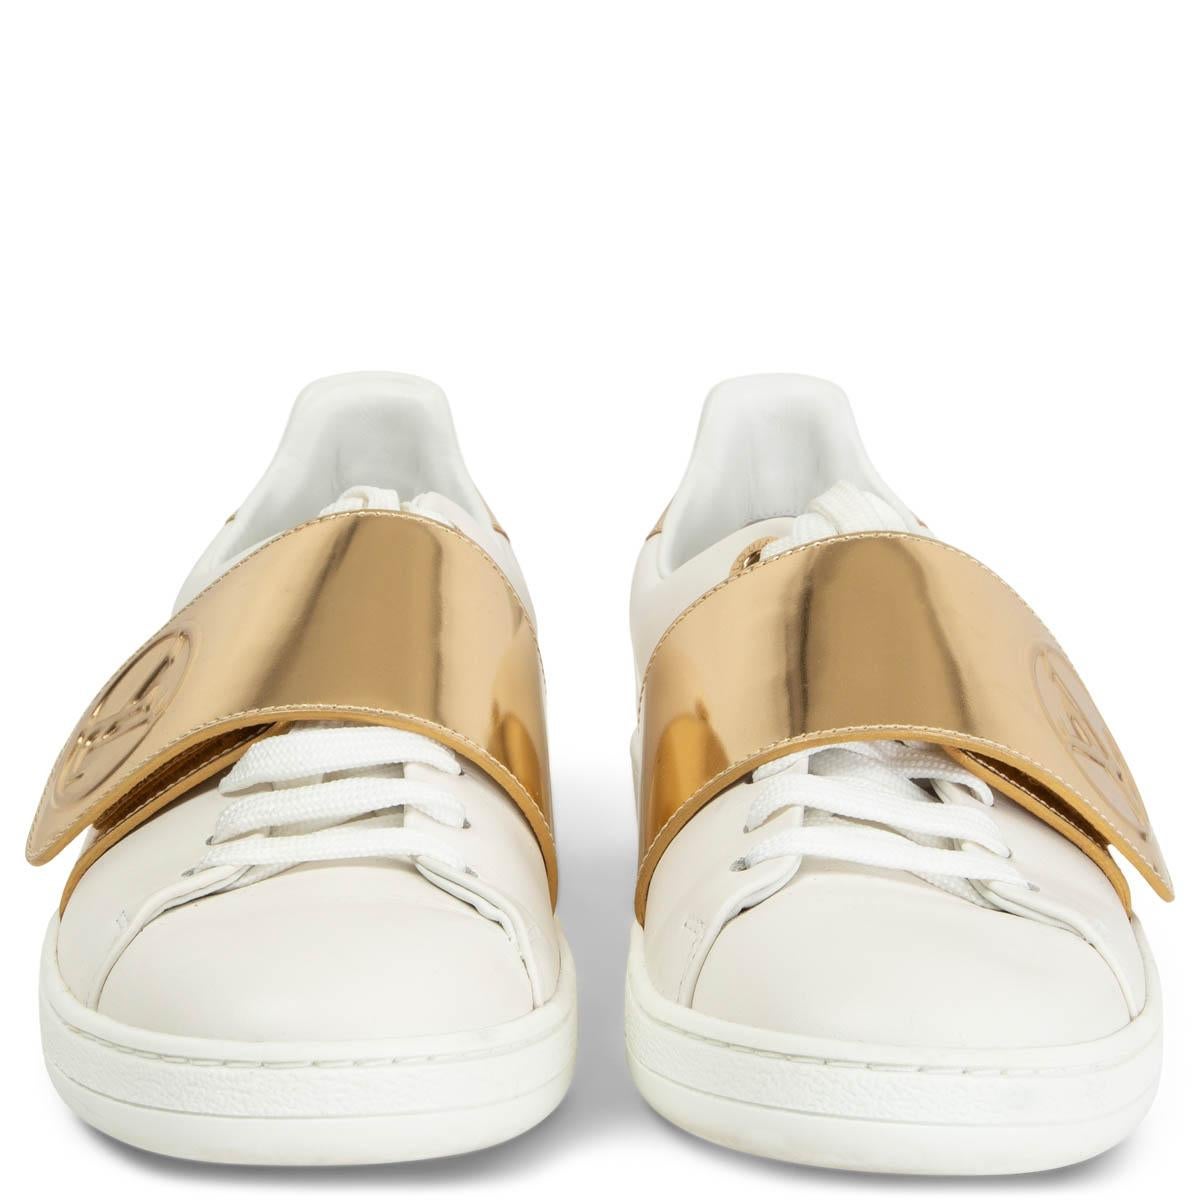 100% authentic Louis Vuitton Low Top Front Row Sneakers in white smooth leather with metallic gold-tone velcro logo closure. Have been worn and are in excellent condition. 

Measurements
Imprinted Size	36
Shoe Size	36
Inside Sole	23cm